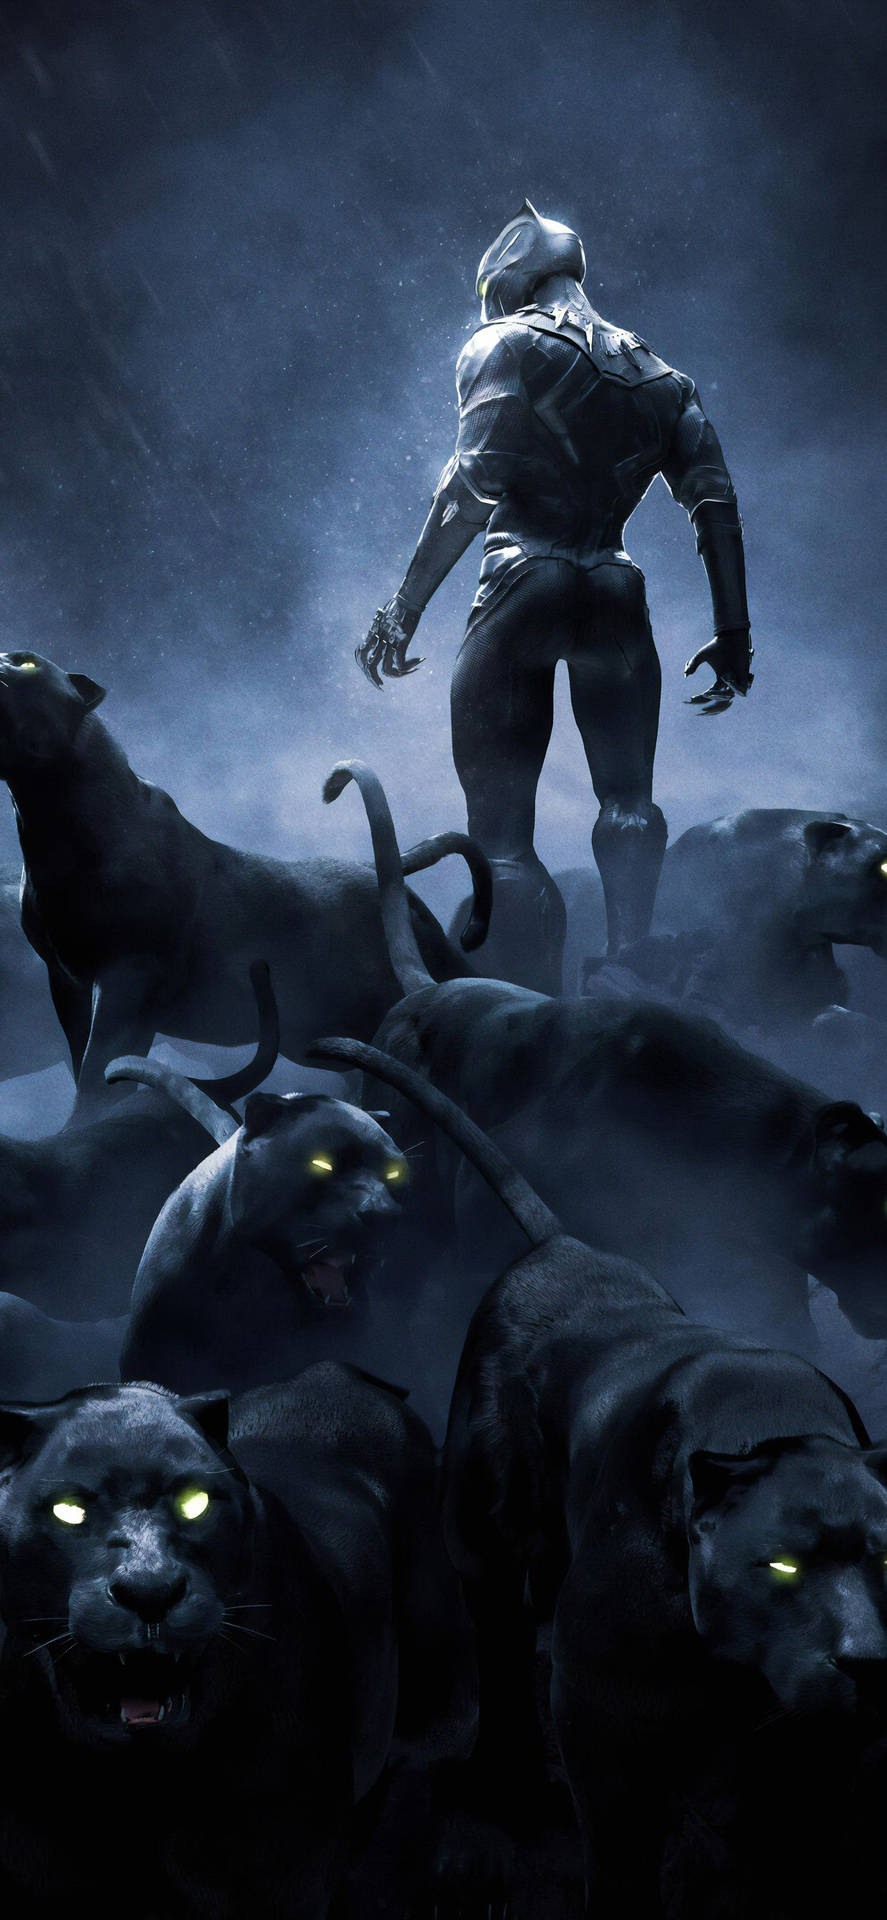 T'challa Black Panther Android